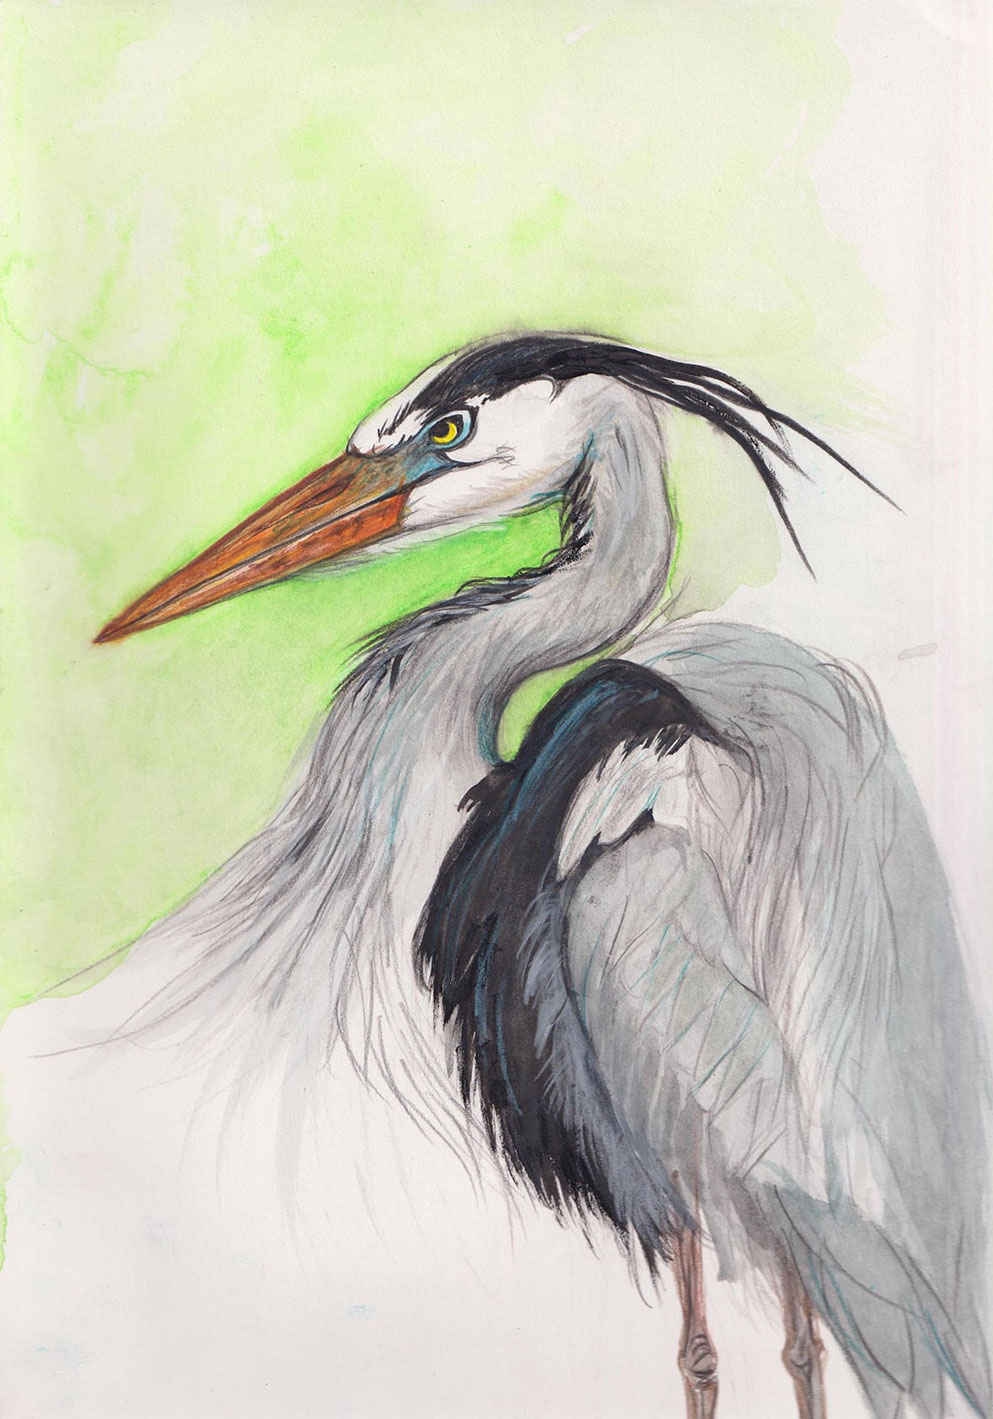 A vertical watercolour illustration of a heron features a bird with light grey, black and blue highlighted feathers facing the left of the screen. It is set against a light green background.